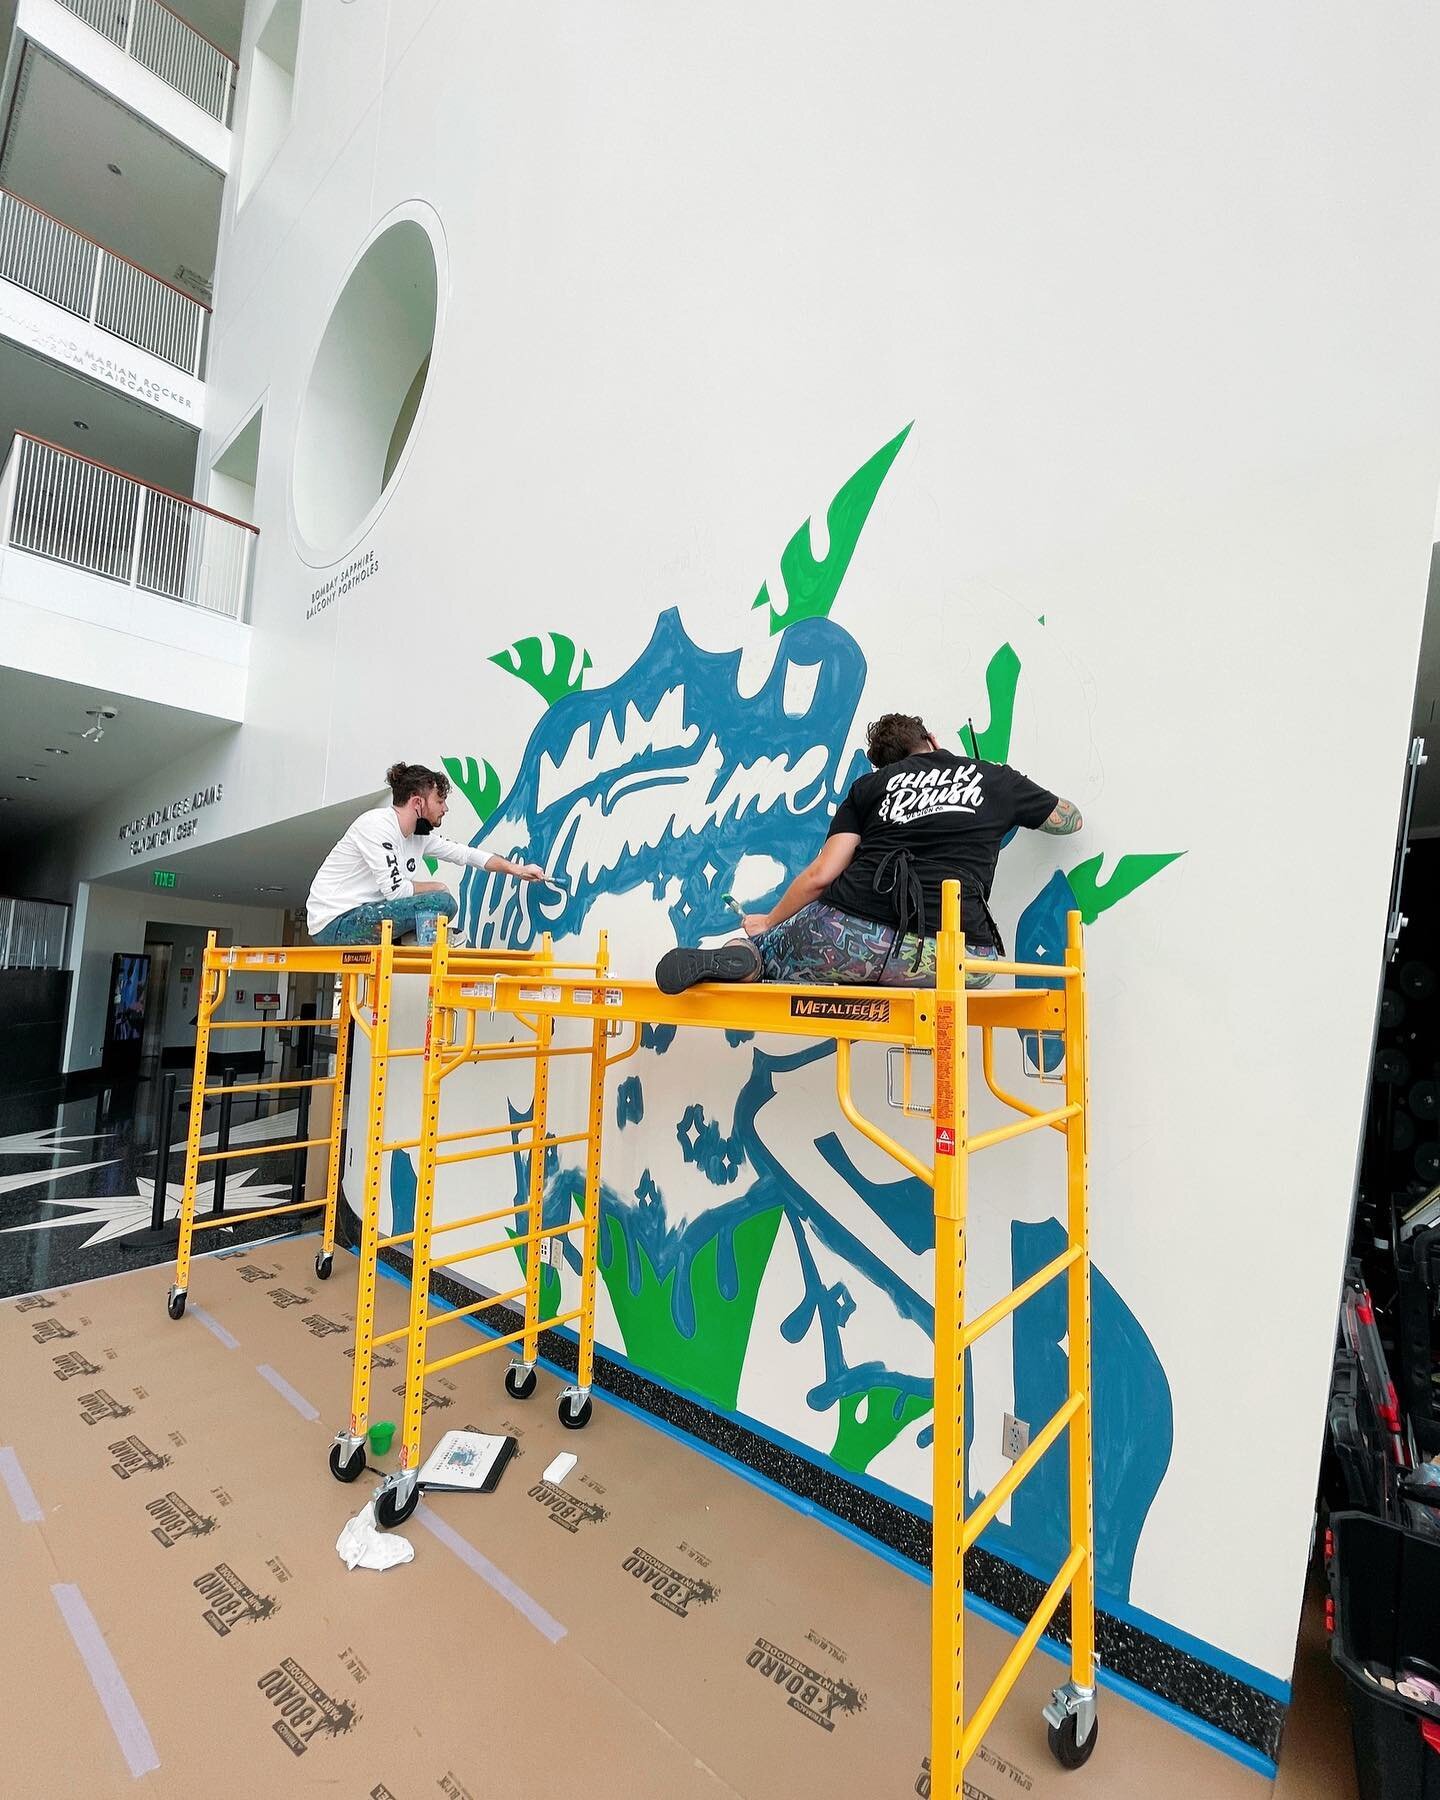 Looking back at our first mural for the @arshtcenter located in the Opera House. Have you been able to see it? #mural #miamimurals #art #painting #handpainted #interactivemural